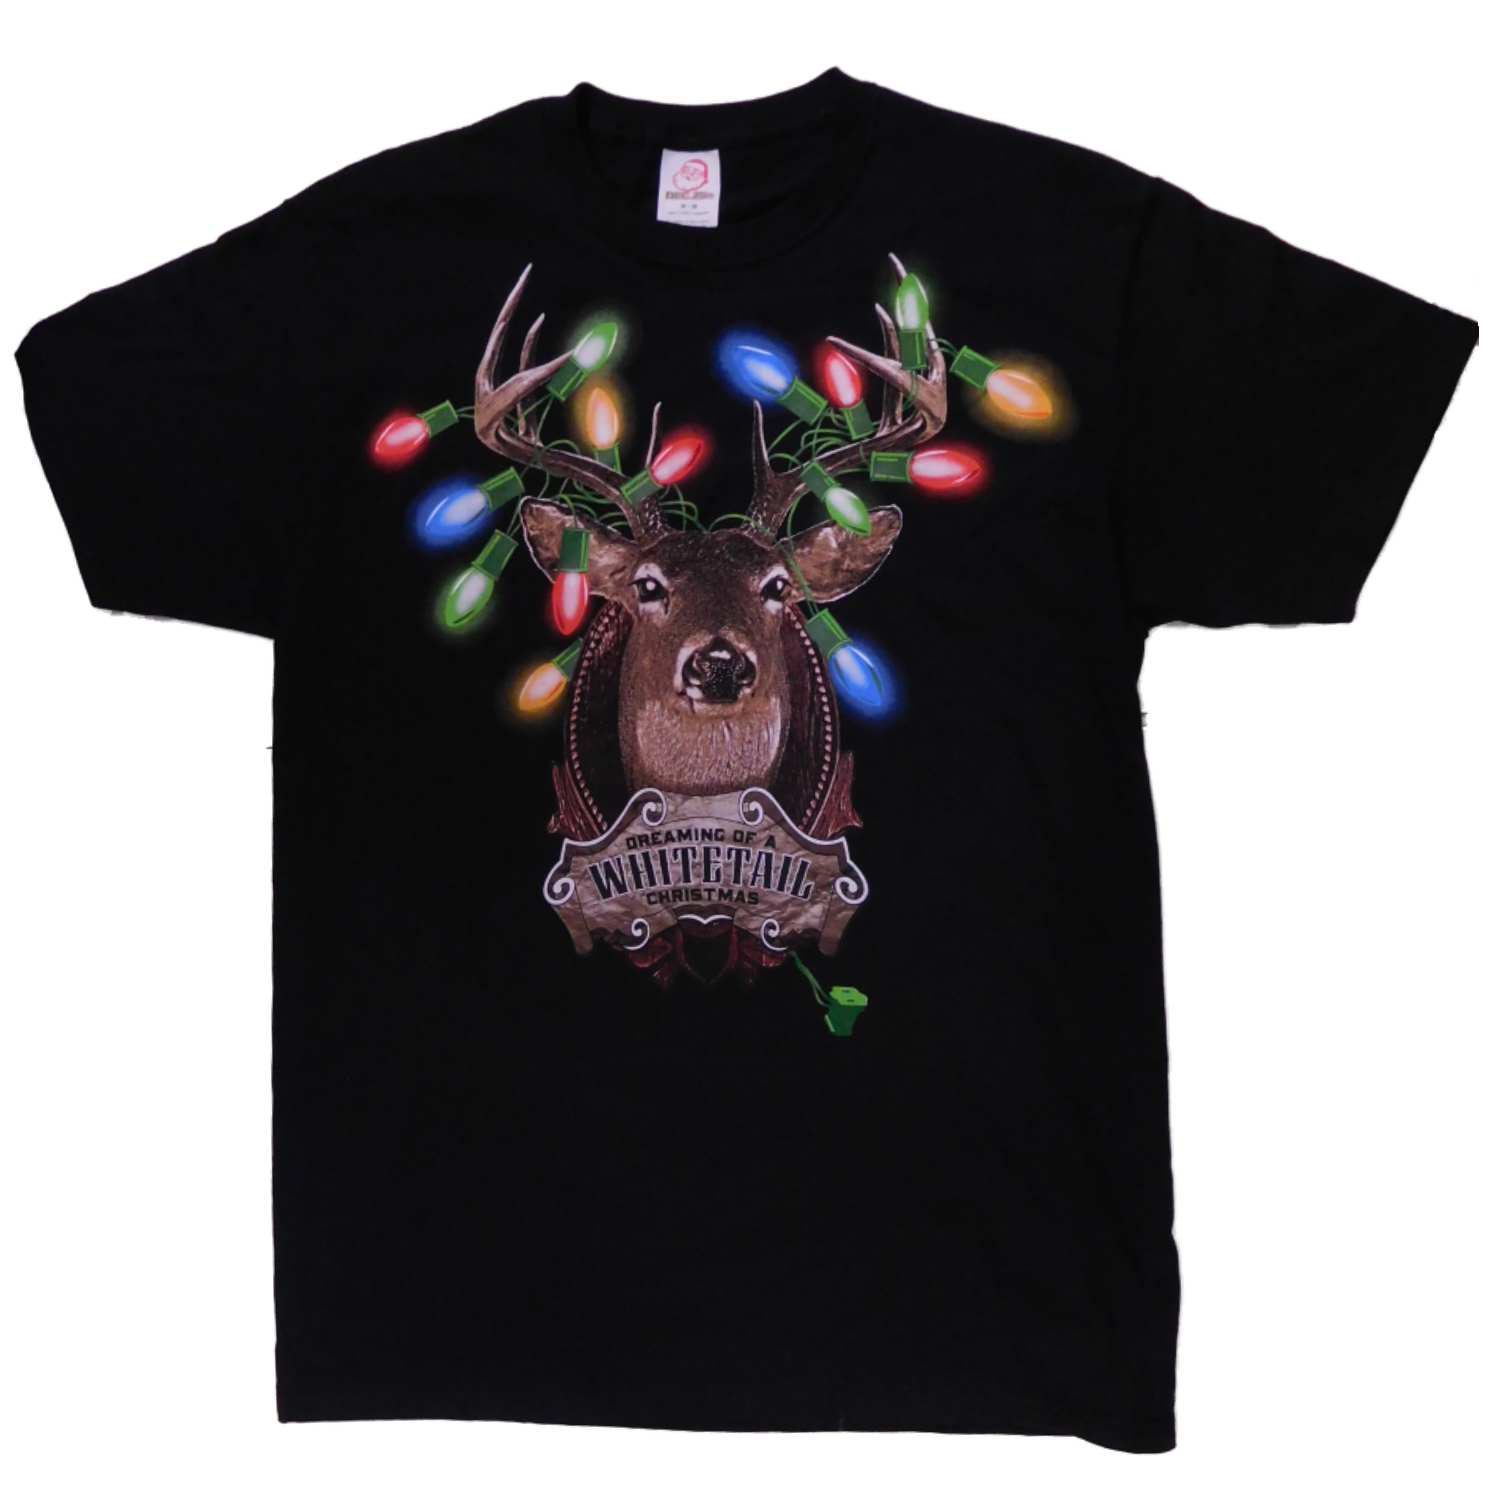 Dec 25th Mens Black Dreaming Of A Whitetail Christmas Holiday T-Shirt